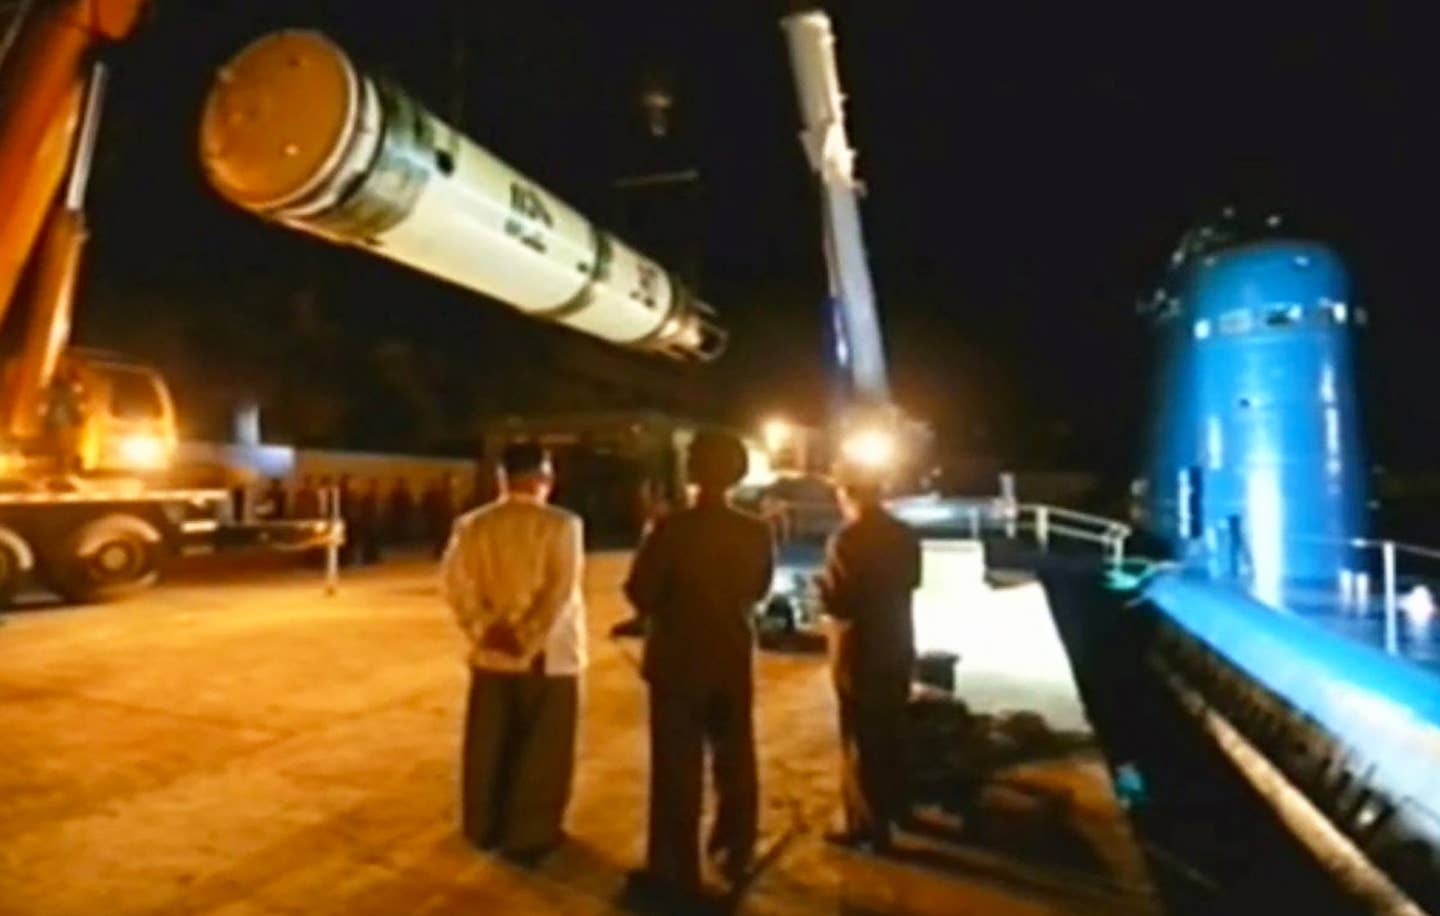 Photos Emerge Of North Korea’s Sub-Launched Ballistic Missile After Successful Test